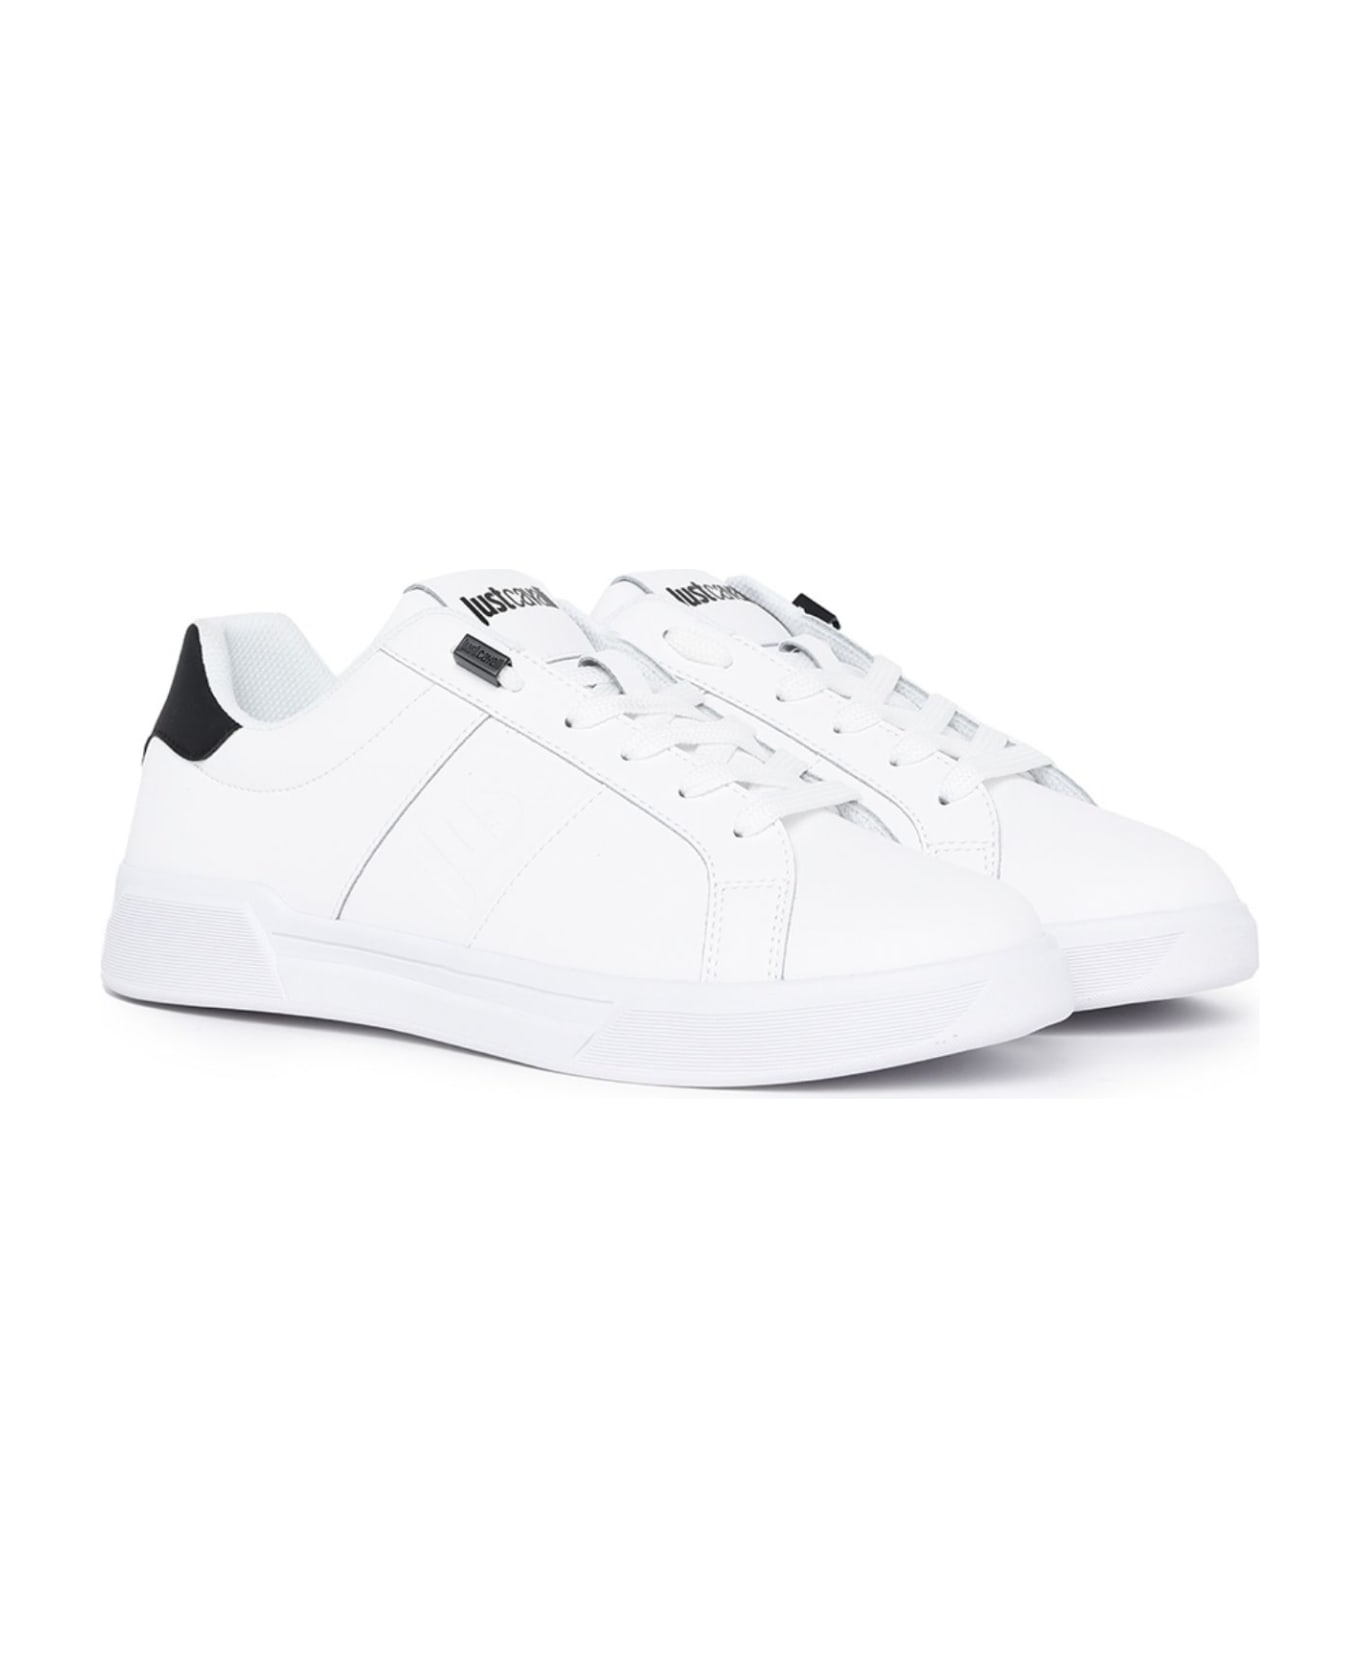 Just Cavalli Shoes - White